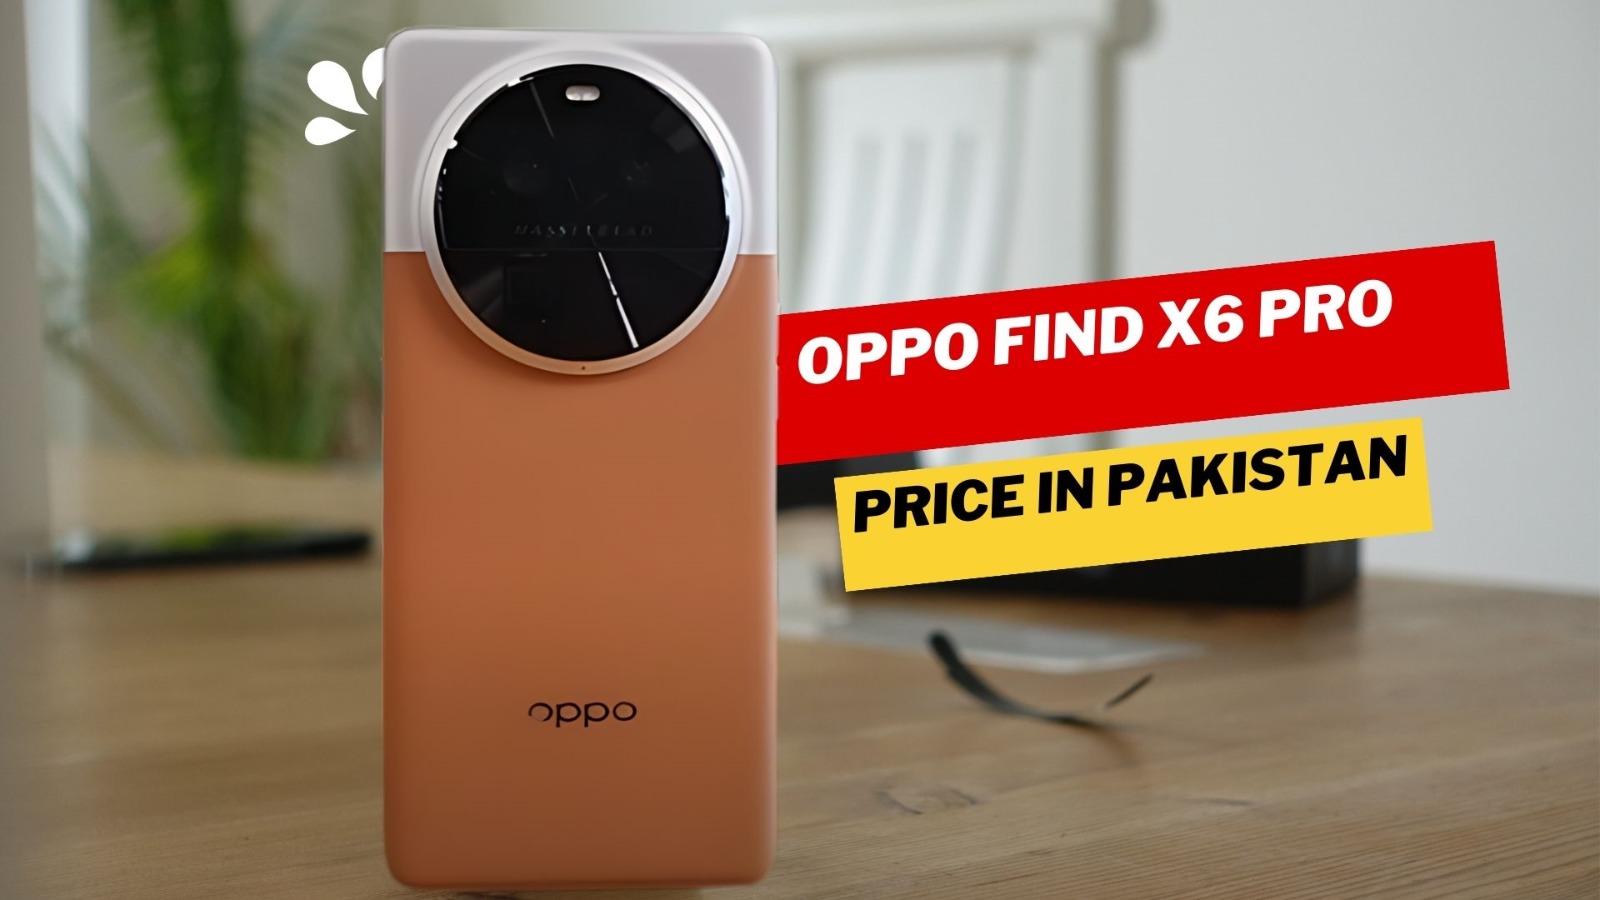 Oppo Find X6 Pro Price in Pakistan & Specifications